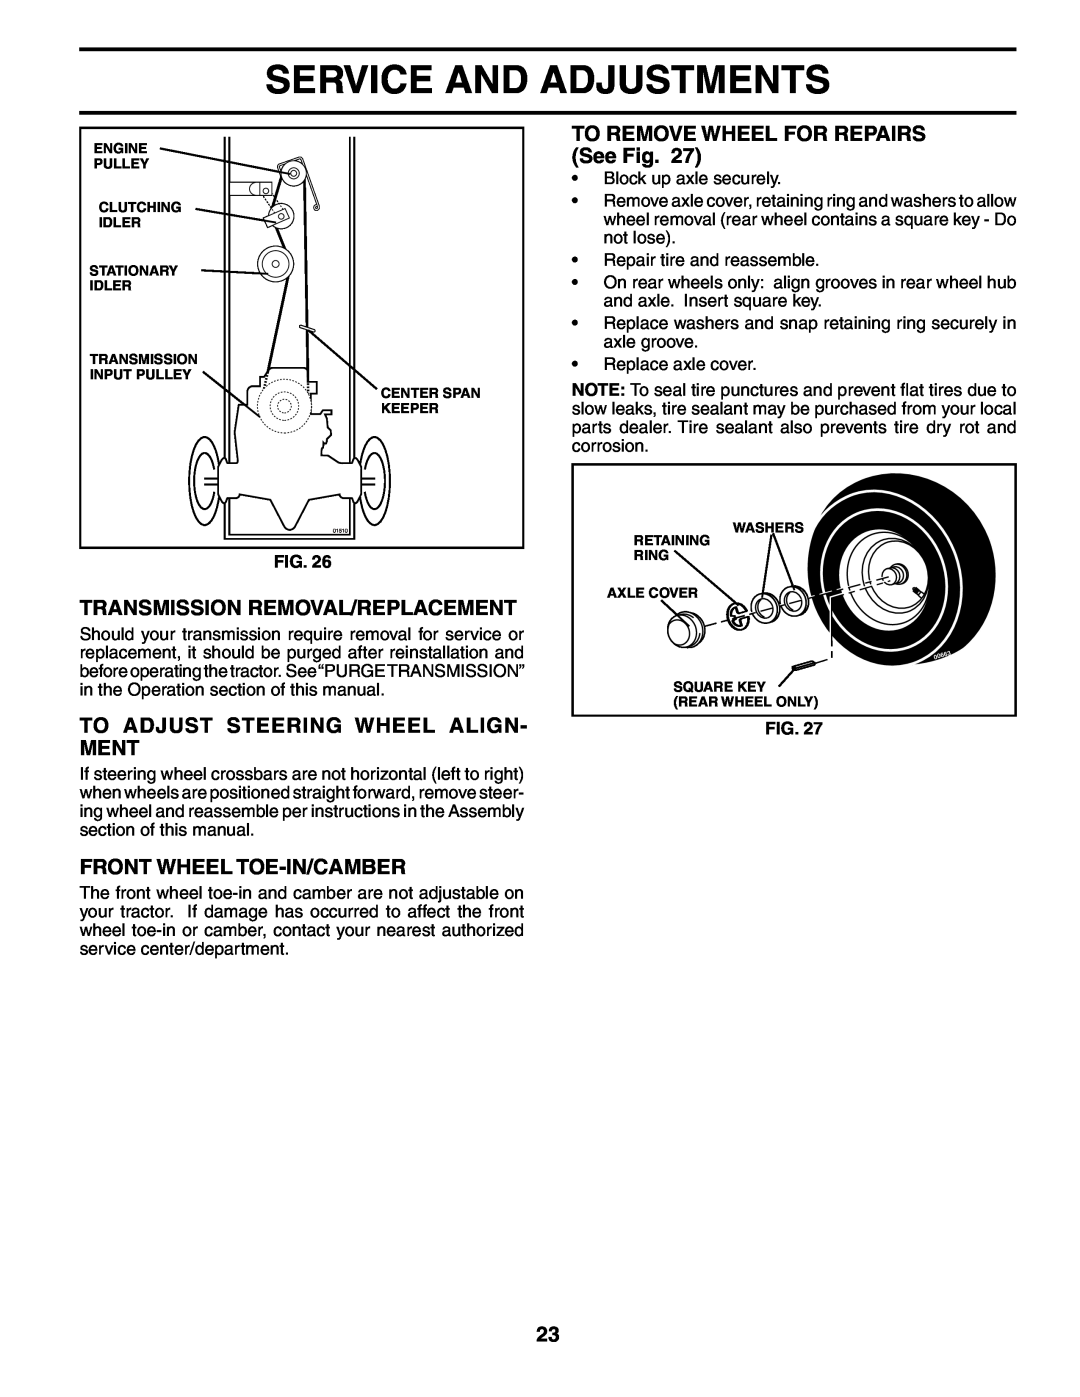 Poulan 186996, 954570925 Transmission Removal/Replacement, To Adjust Steering Wheel Align- Ment, Front Wheel Toe-In/Camber 